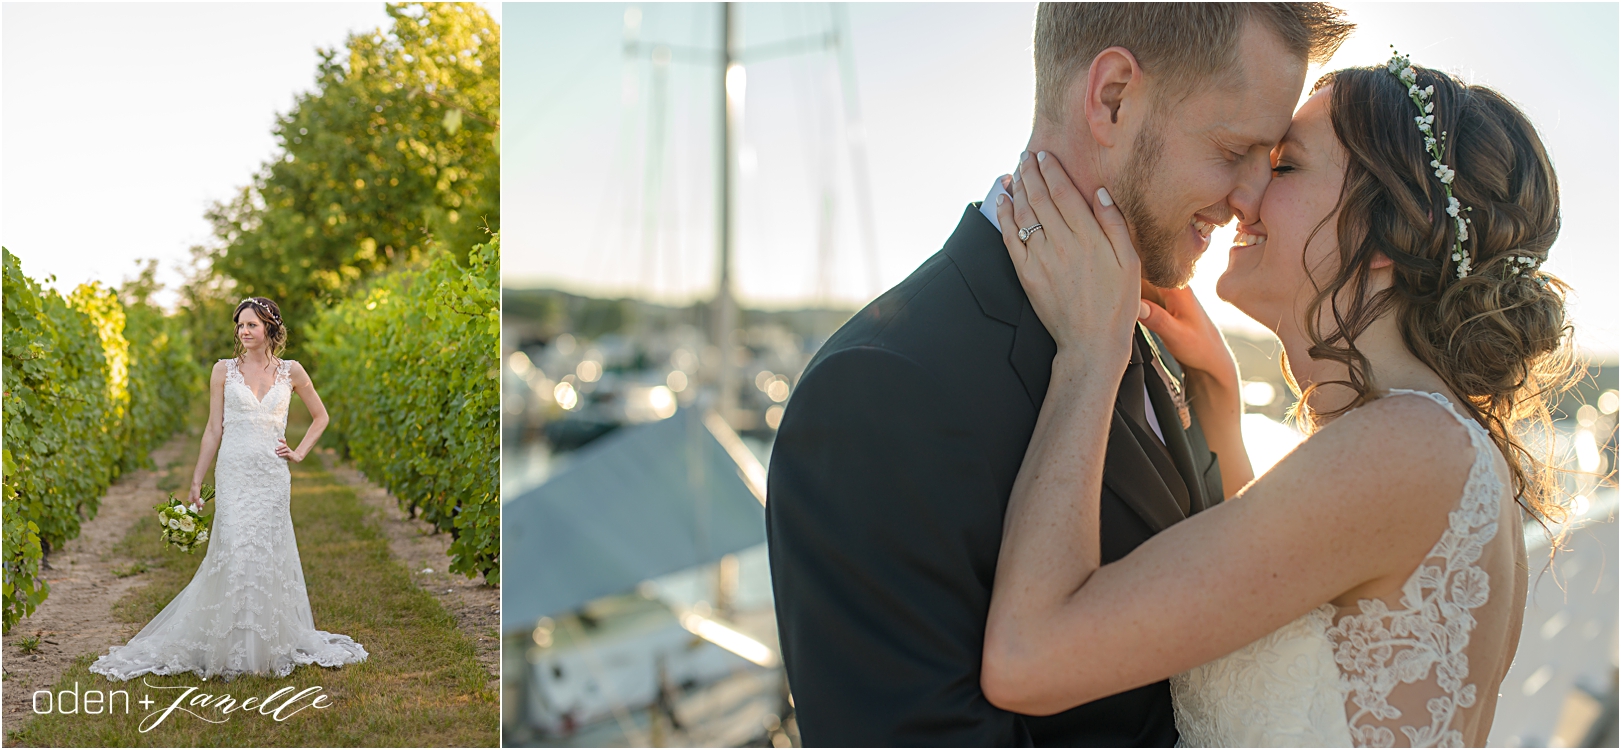 Dani + Jed | Oden and Janelle Photography 2016 |JJH_6642|7-1.jpg